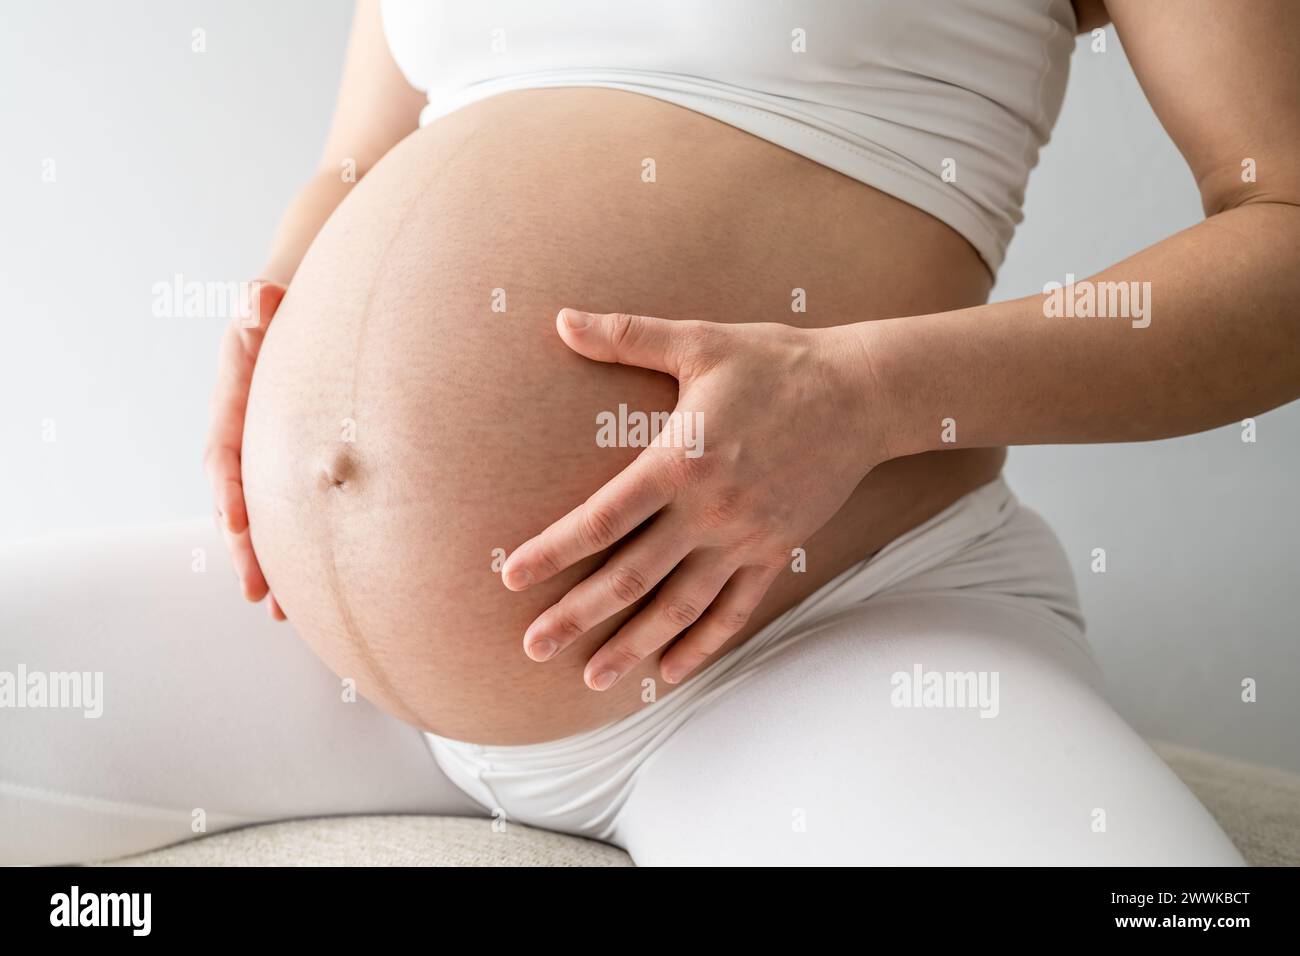 Description: Middle part of a woman sitting on a stool and gently holding her very round pregnant baby belly. Side angle view. White background. Brigh Stock Photo